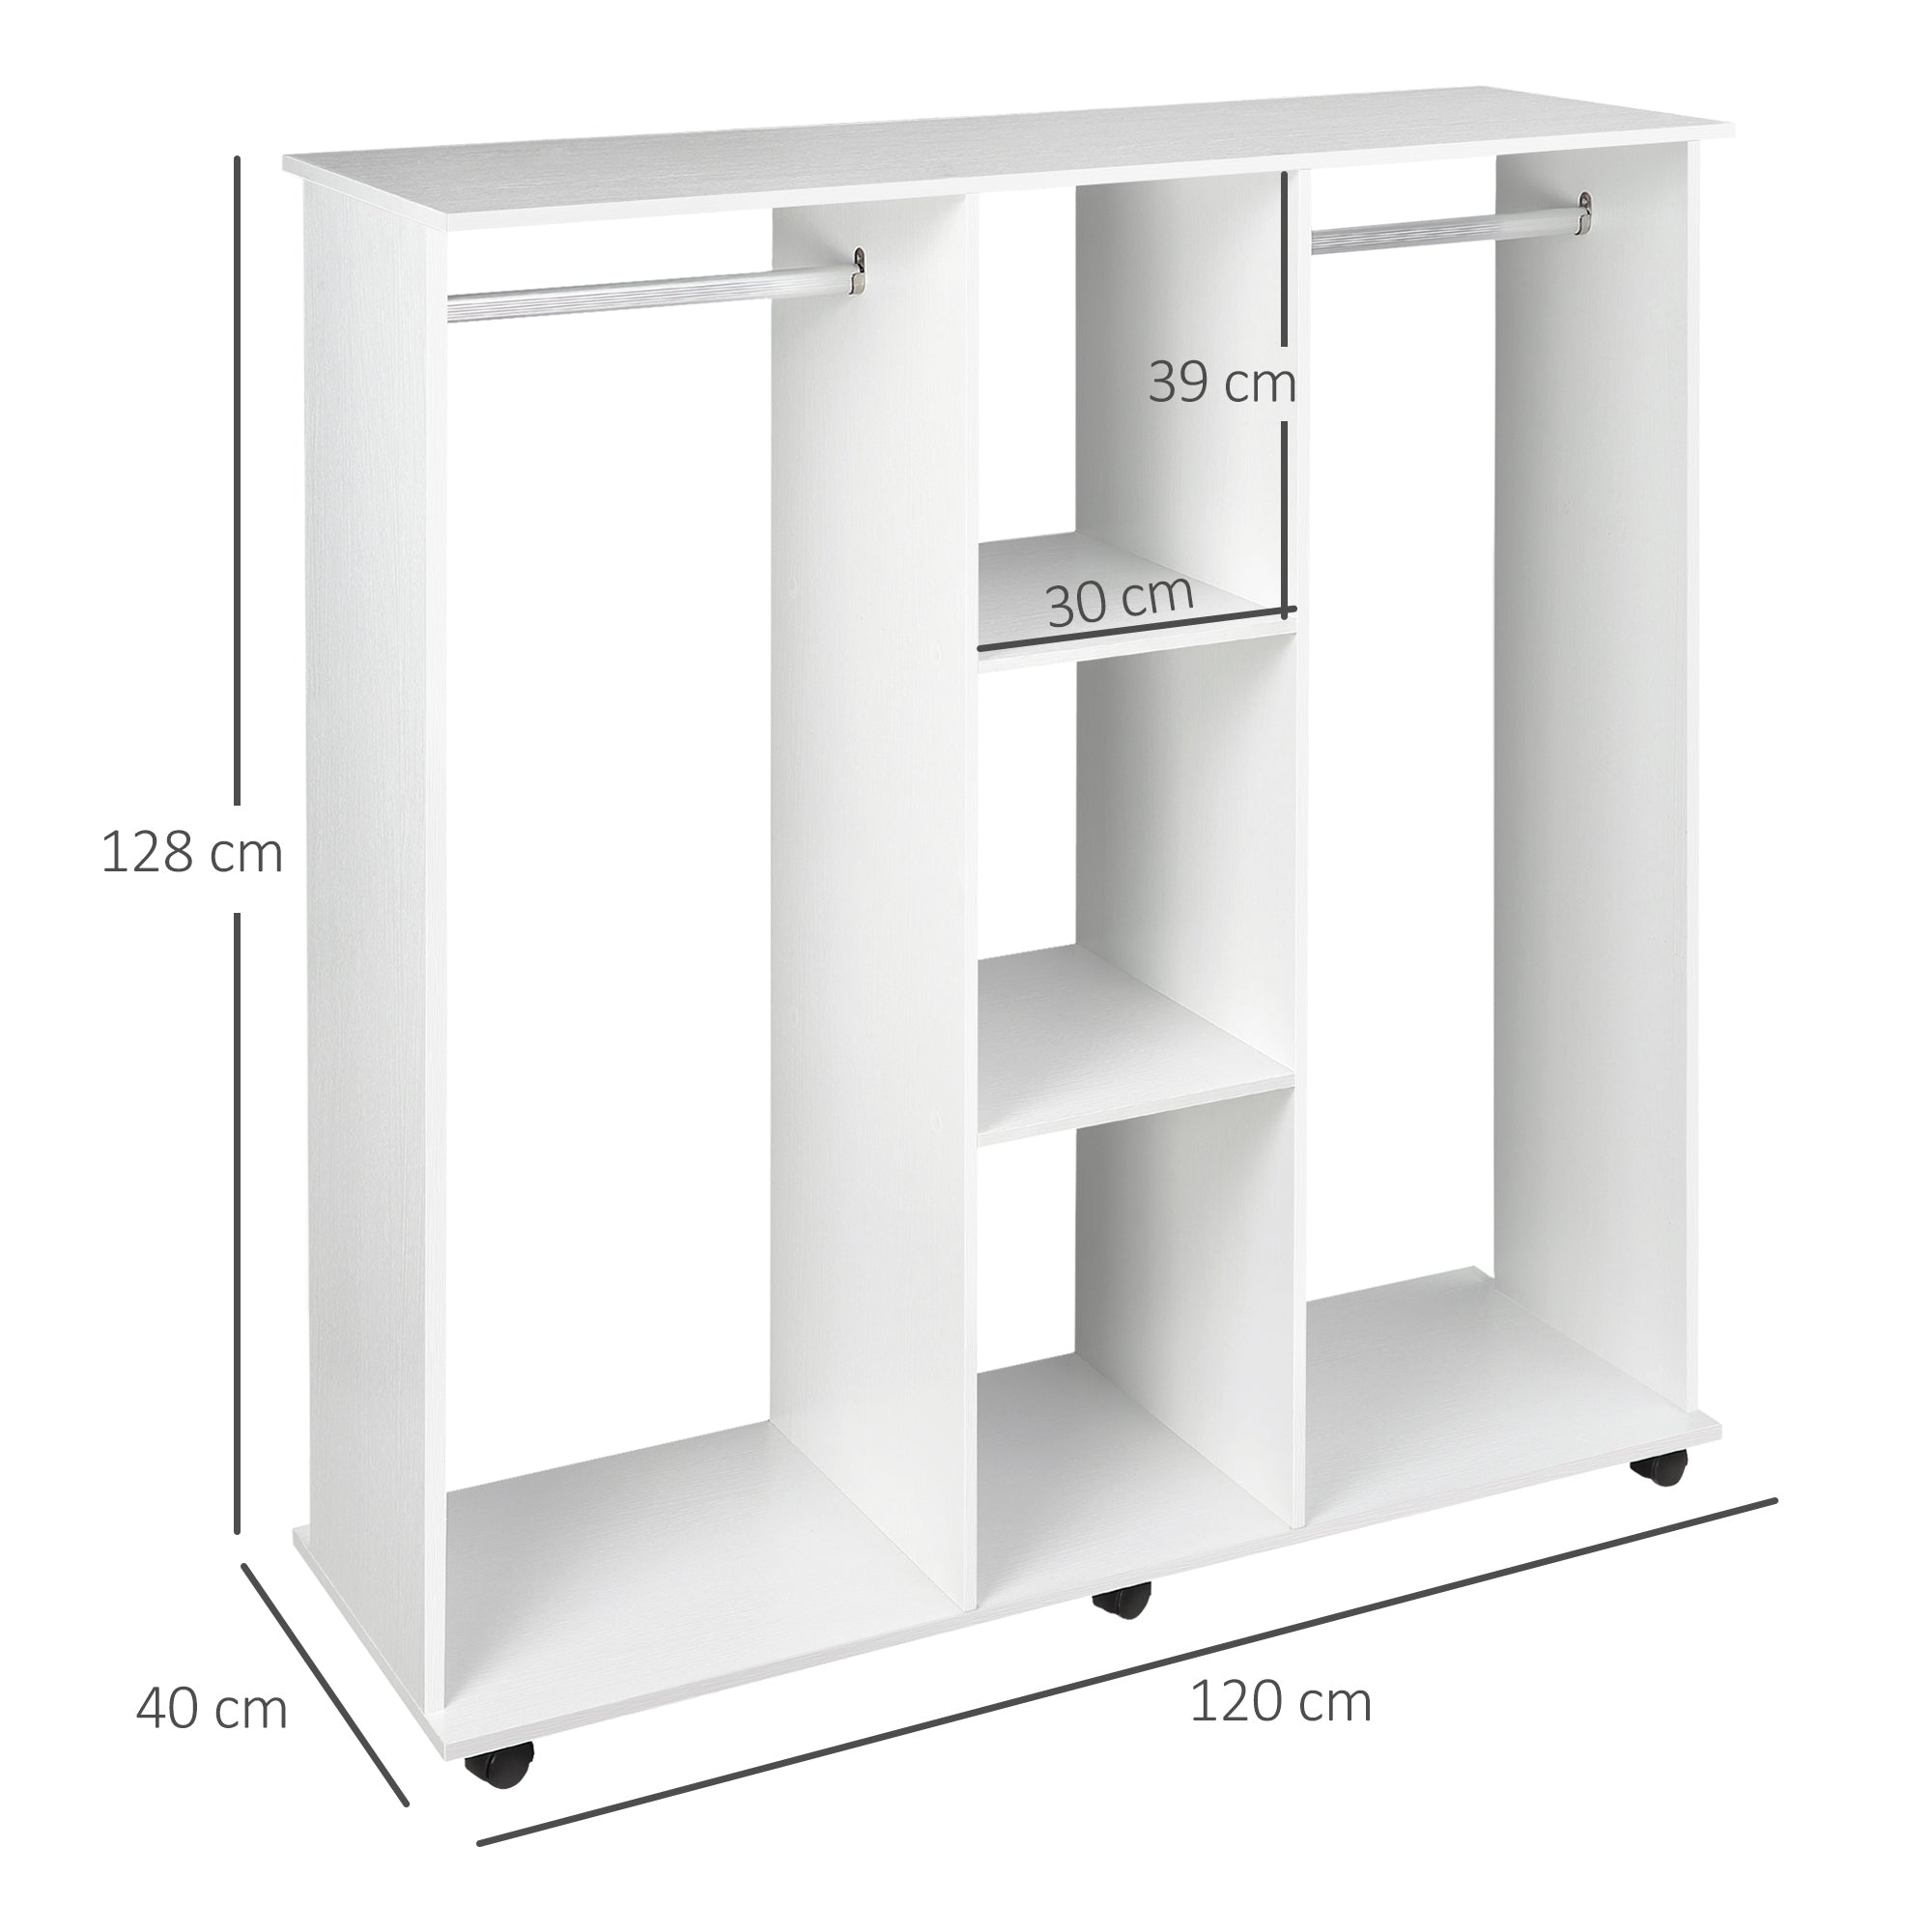 Double Mobile Open Wardrobe With Clothes Hanging Rails Storage Shelves Organizer Bedroom Furniture - White-2